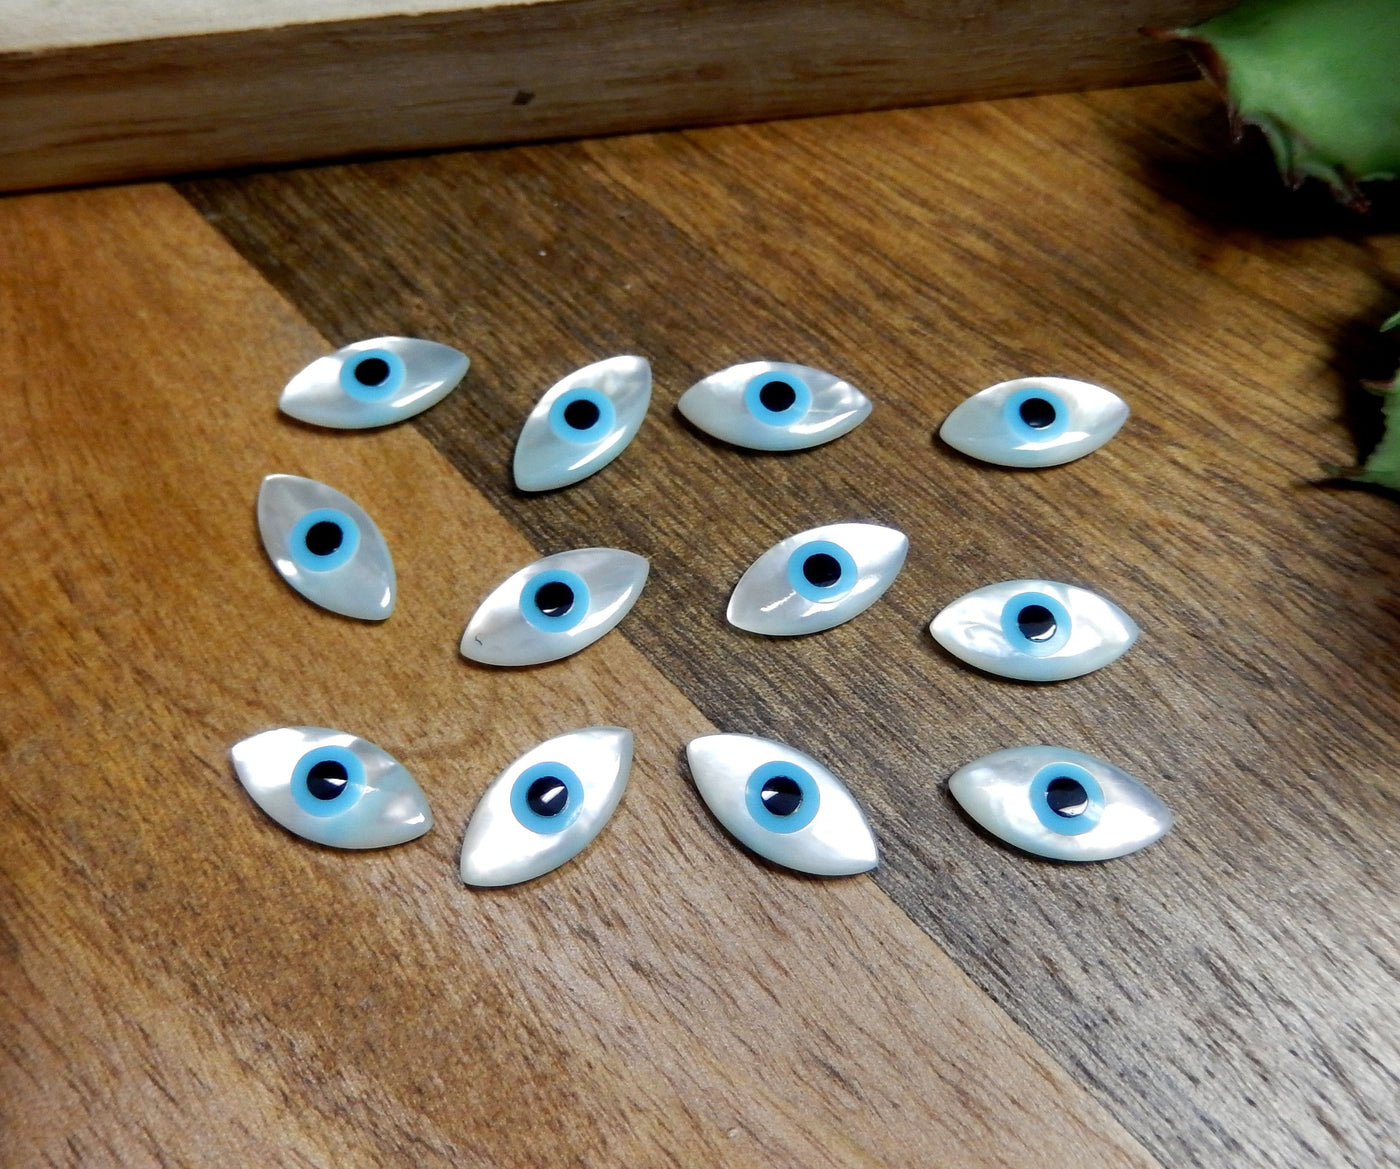 12 mother of pearl Greek eyes on wooden background